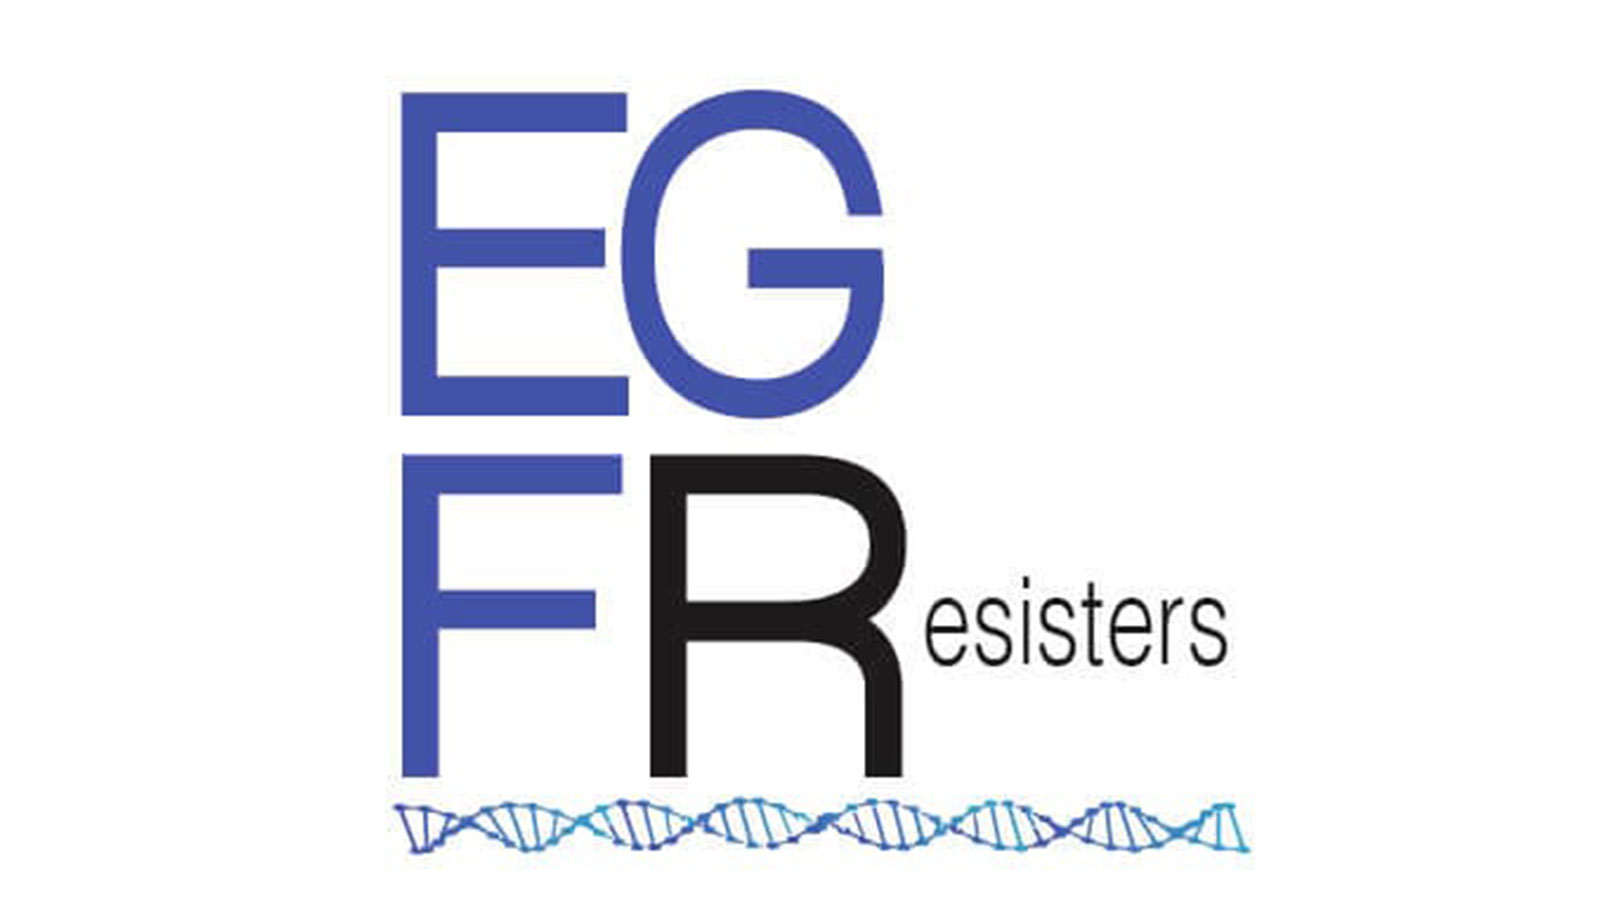 Patient Advocacy Groups Fund EGFR-related Research